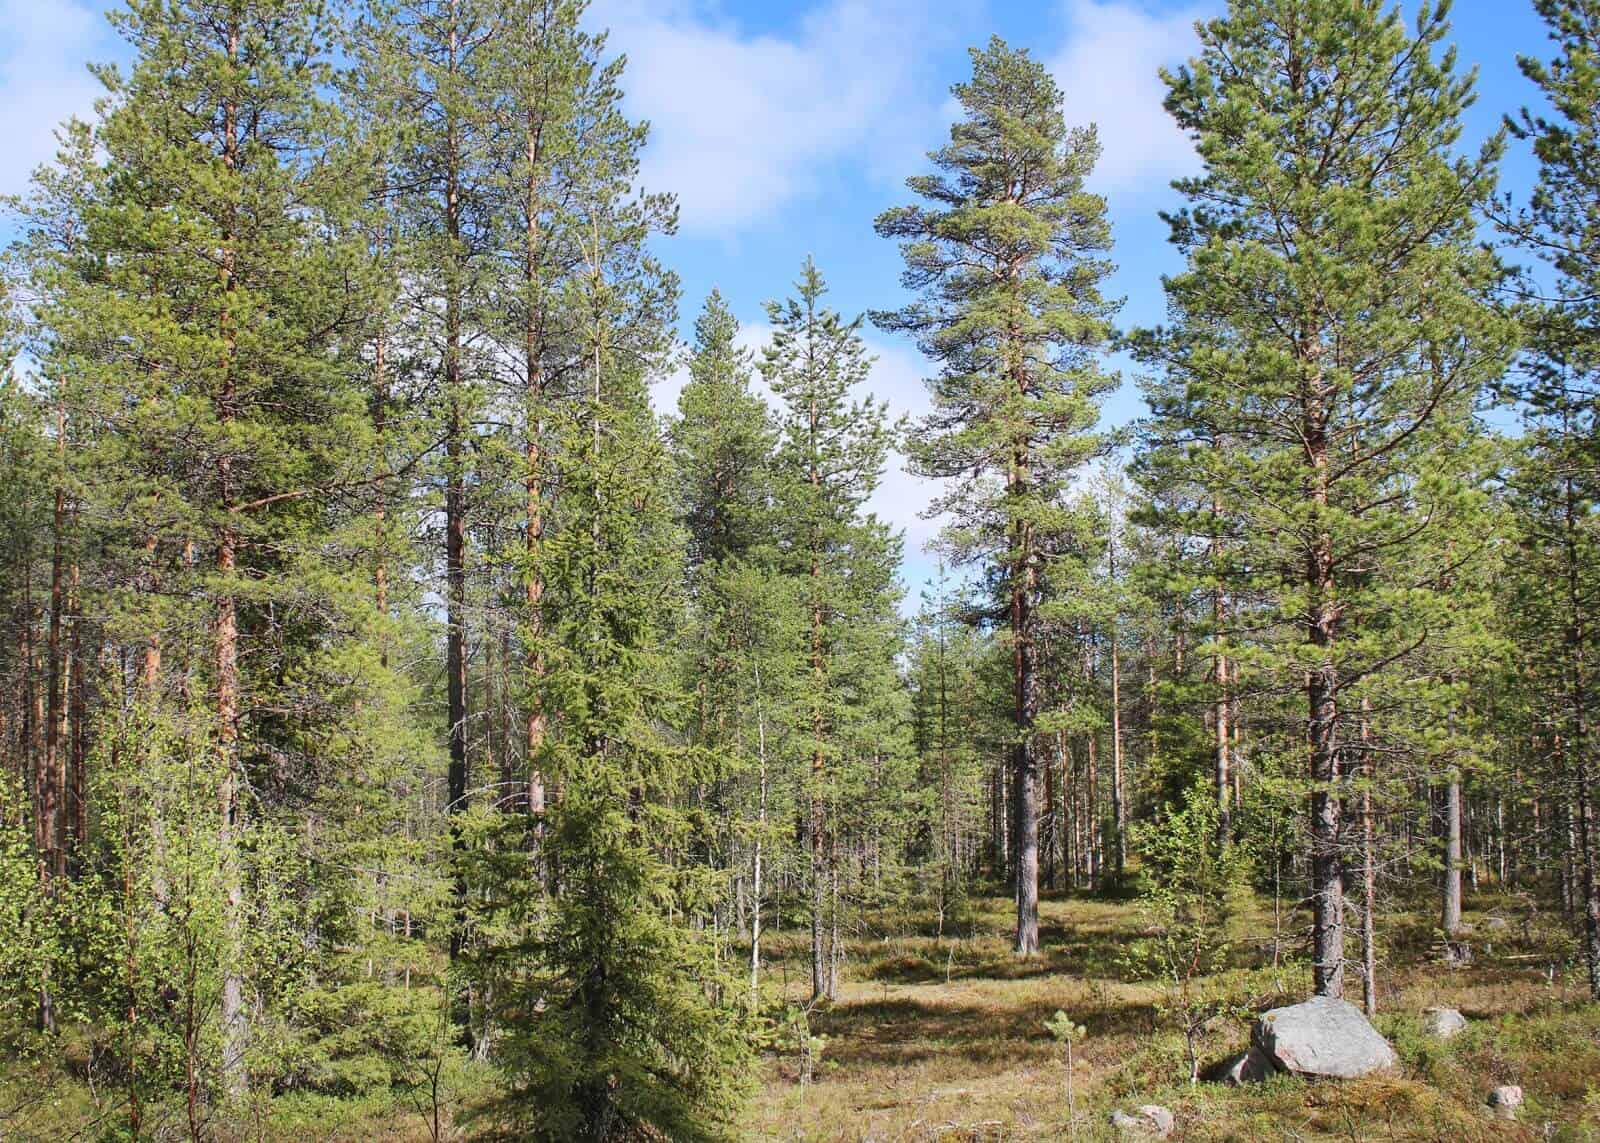 90-year-old coniferous forest